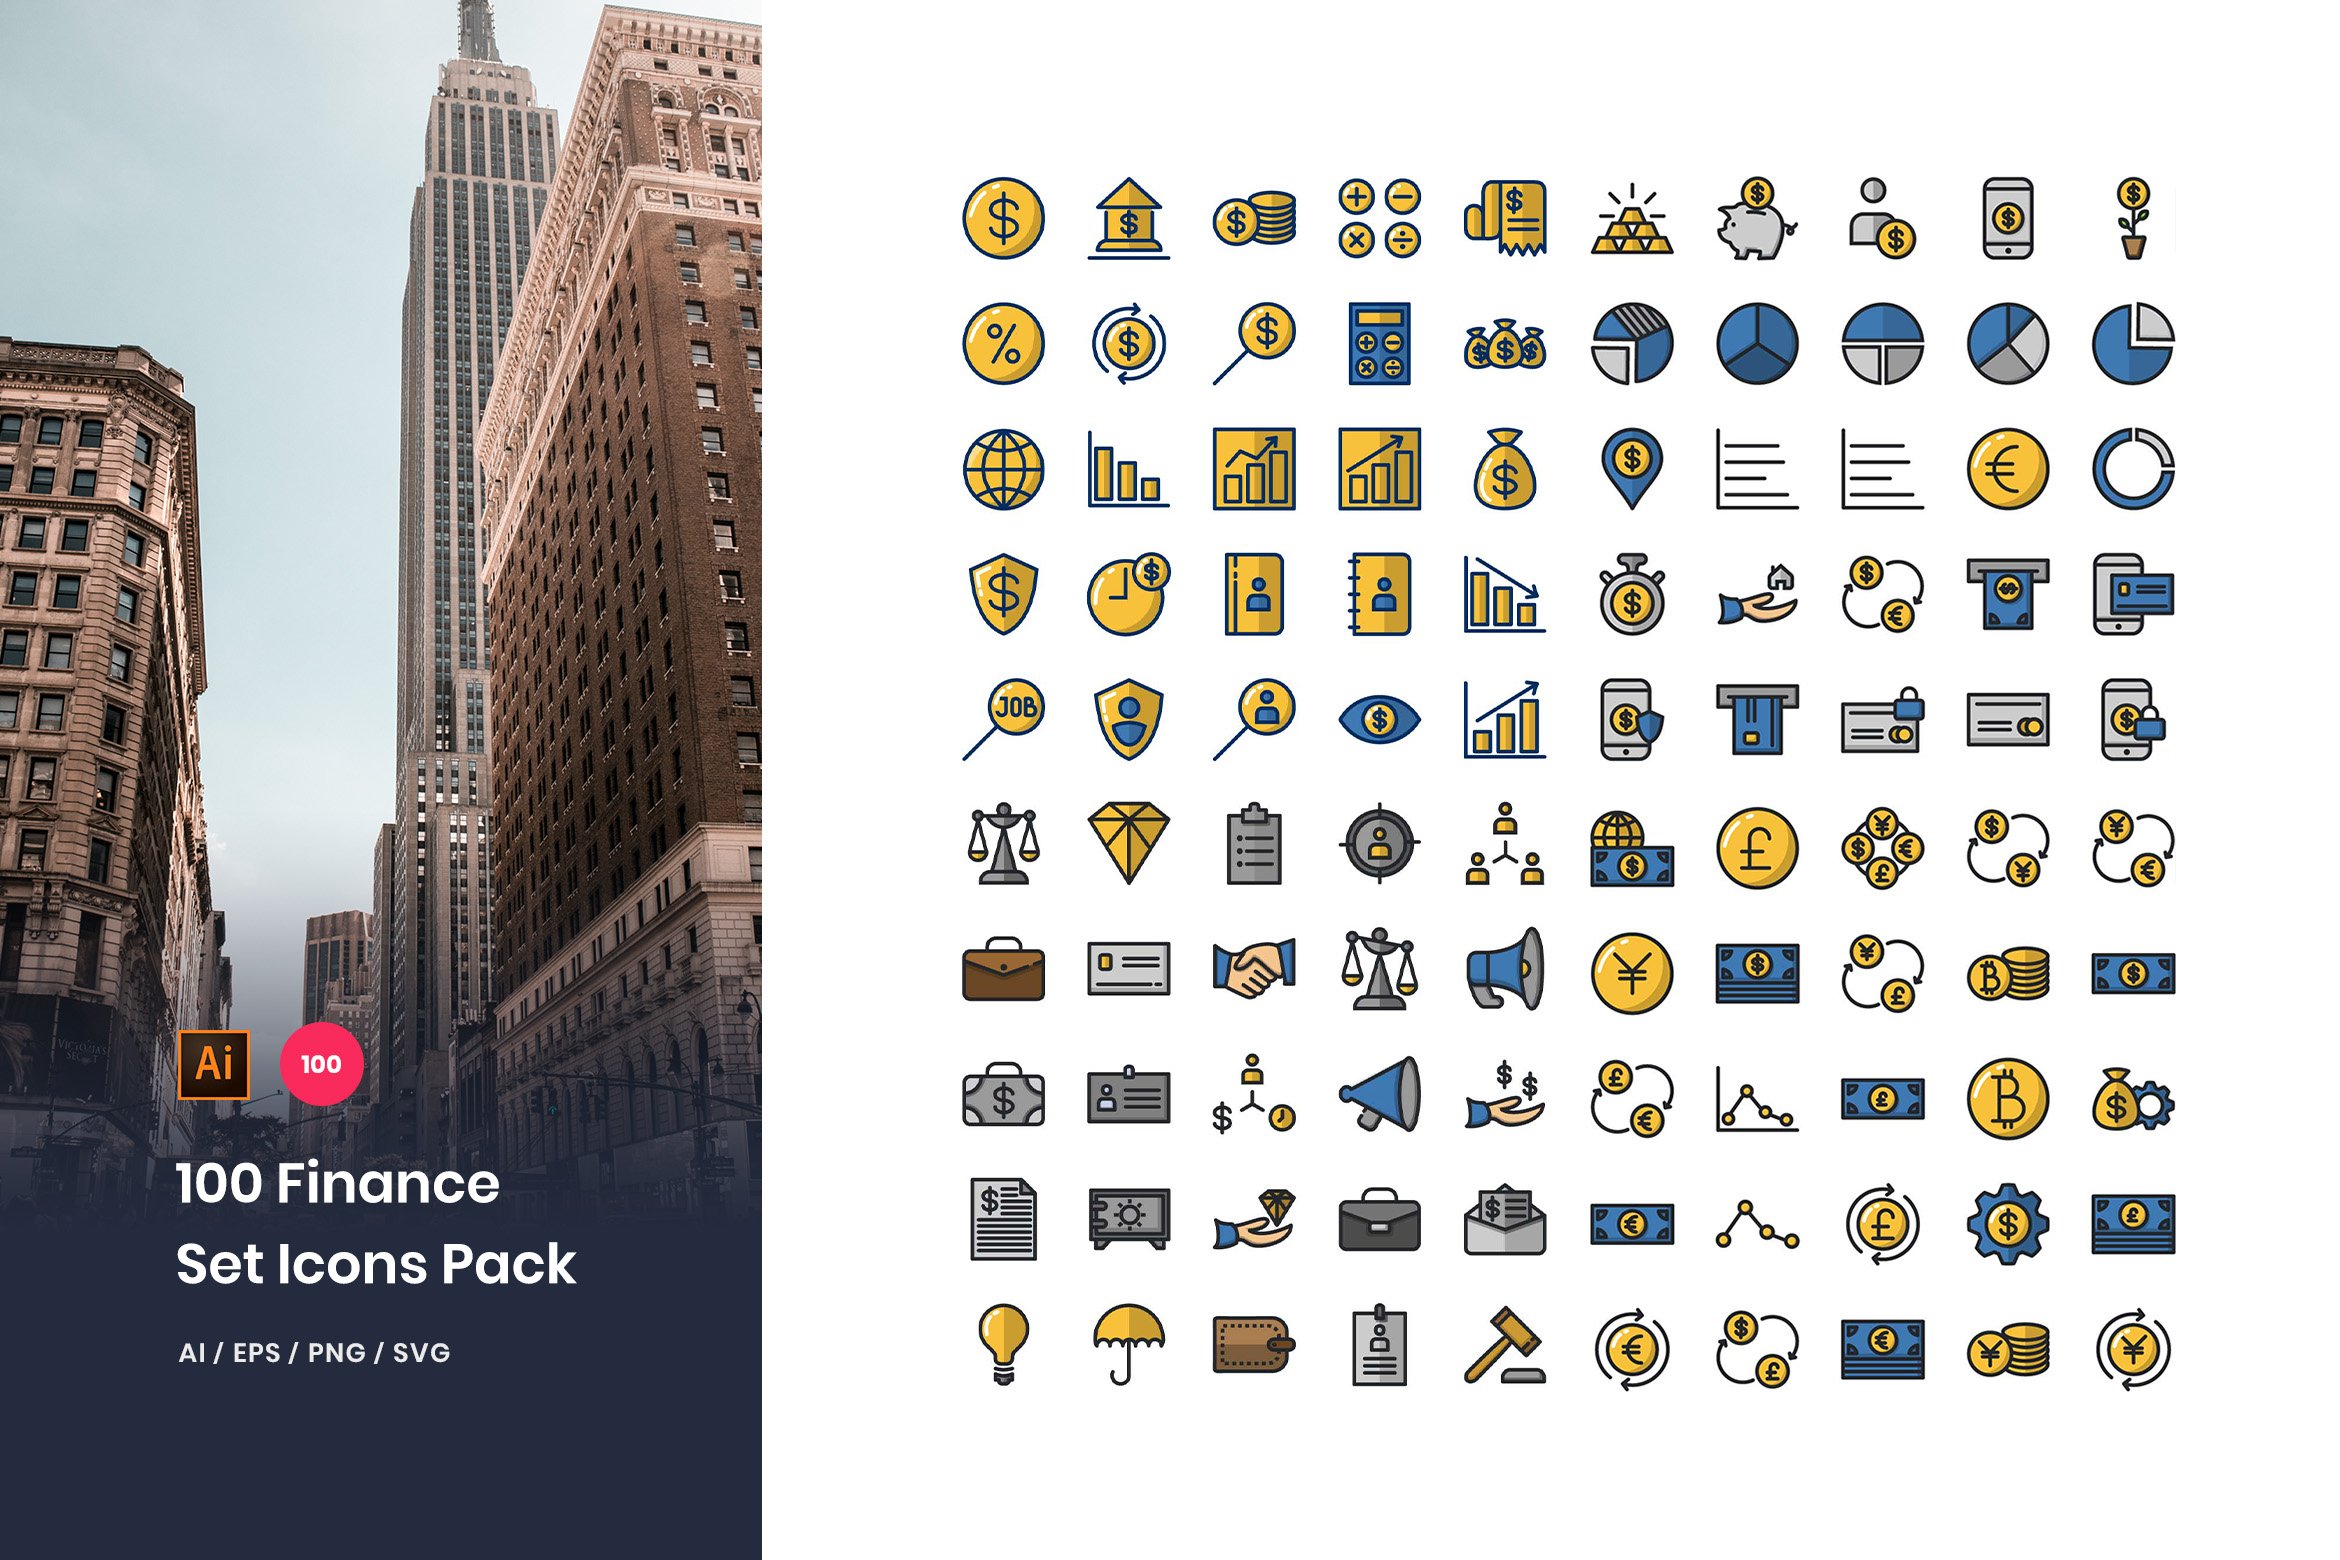 100 Finance Icons Pack cover image.